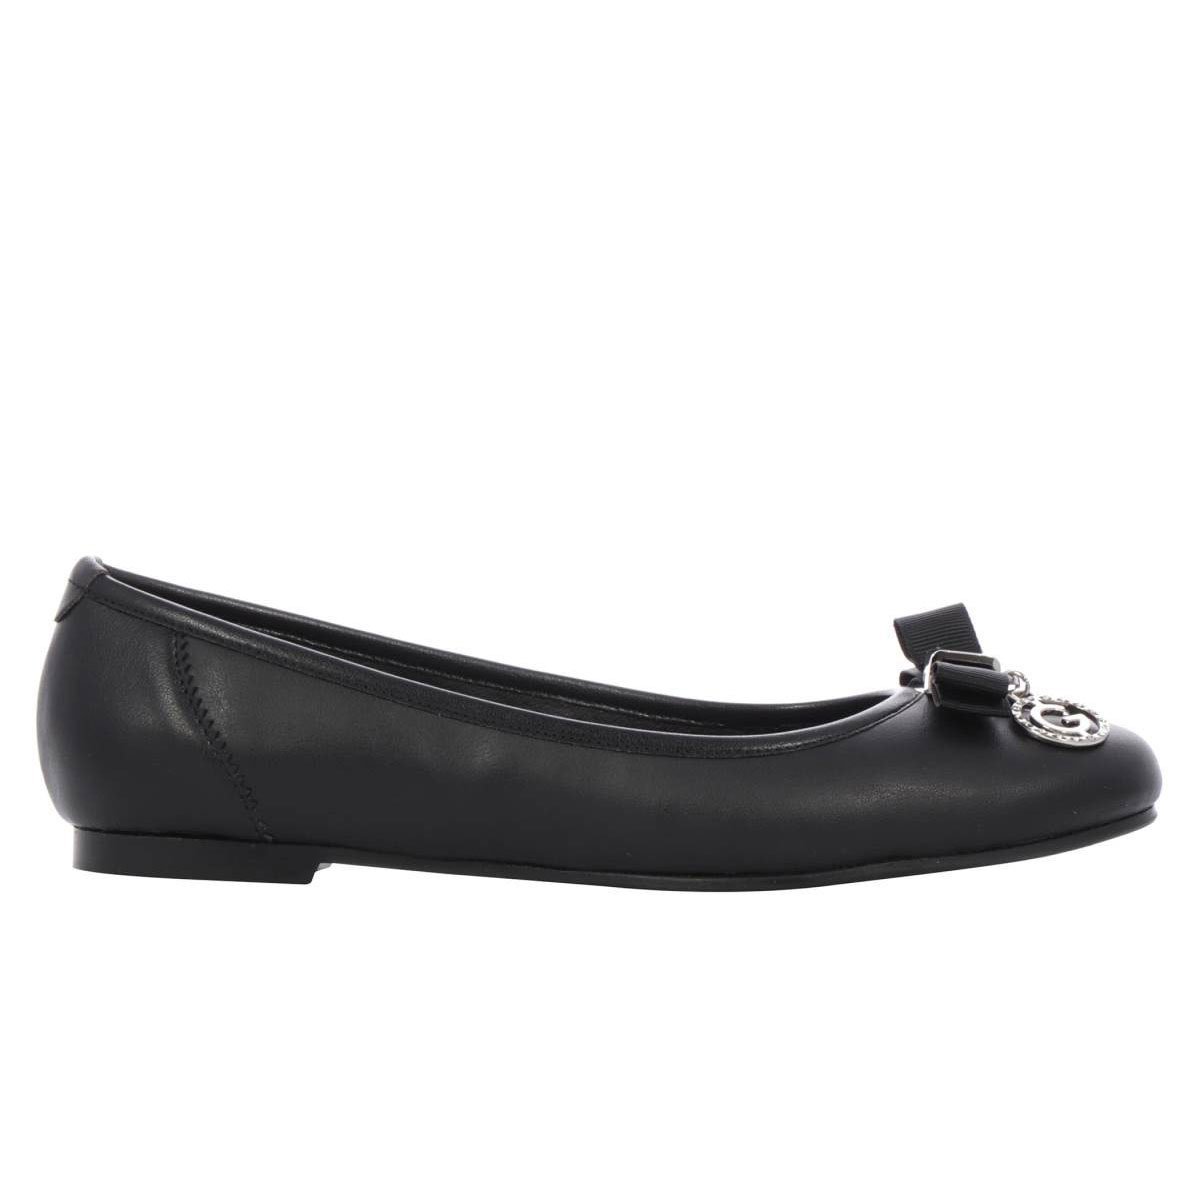 Balerina Flexible Color Negro G By Guess